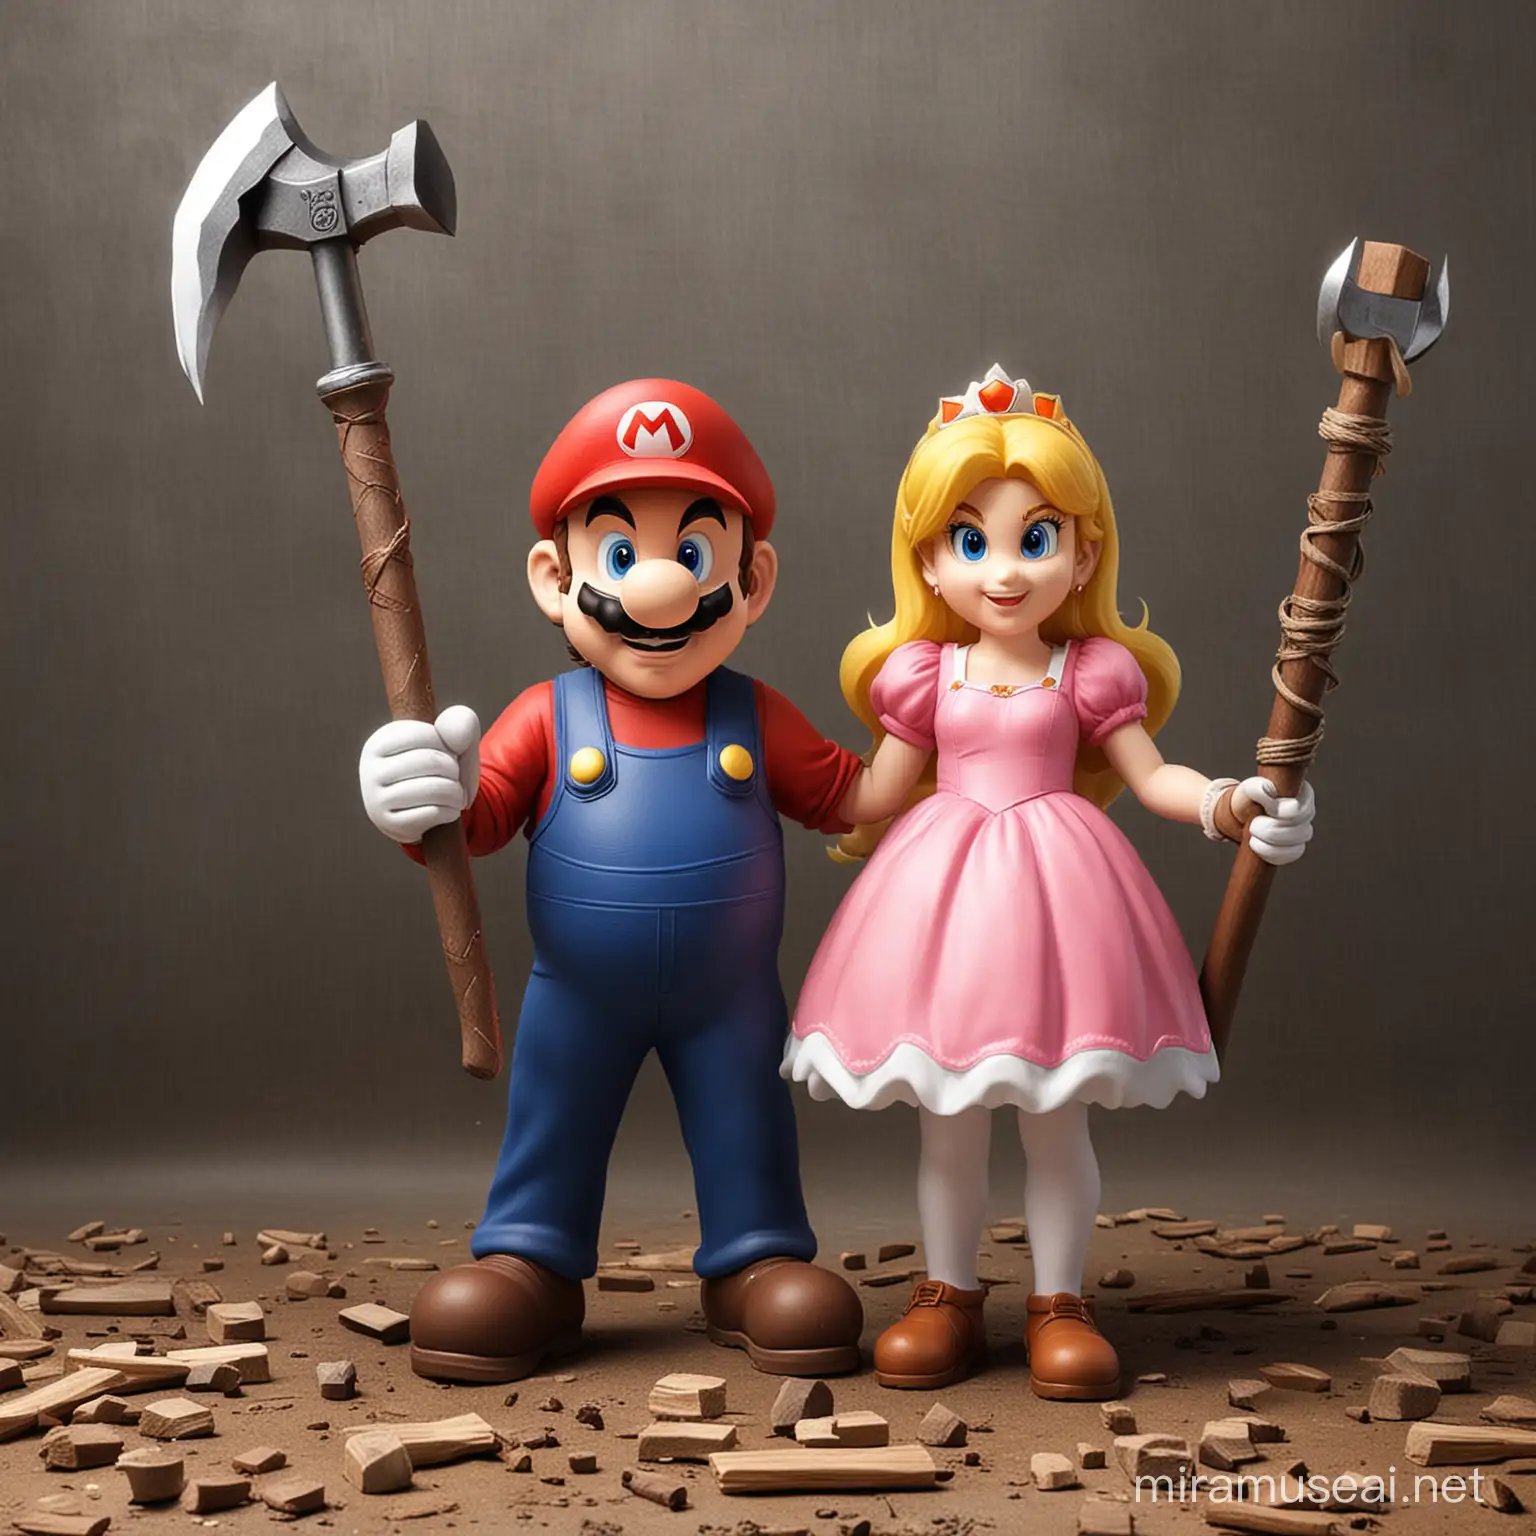 Super Mario and Princess Peach Holding a Sickle and Hammer